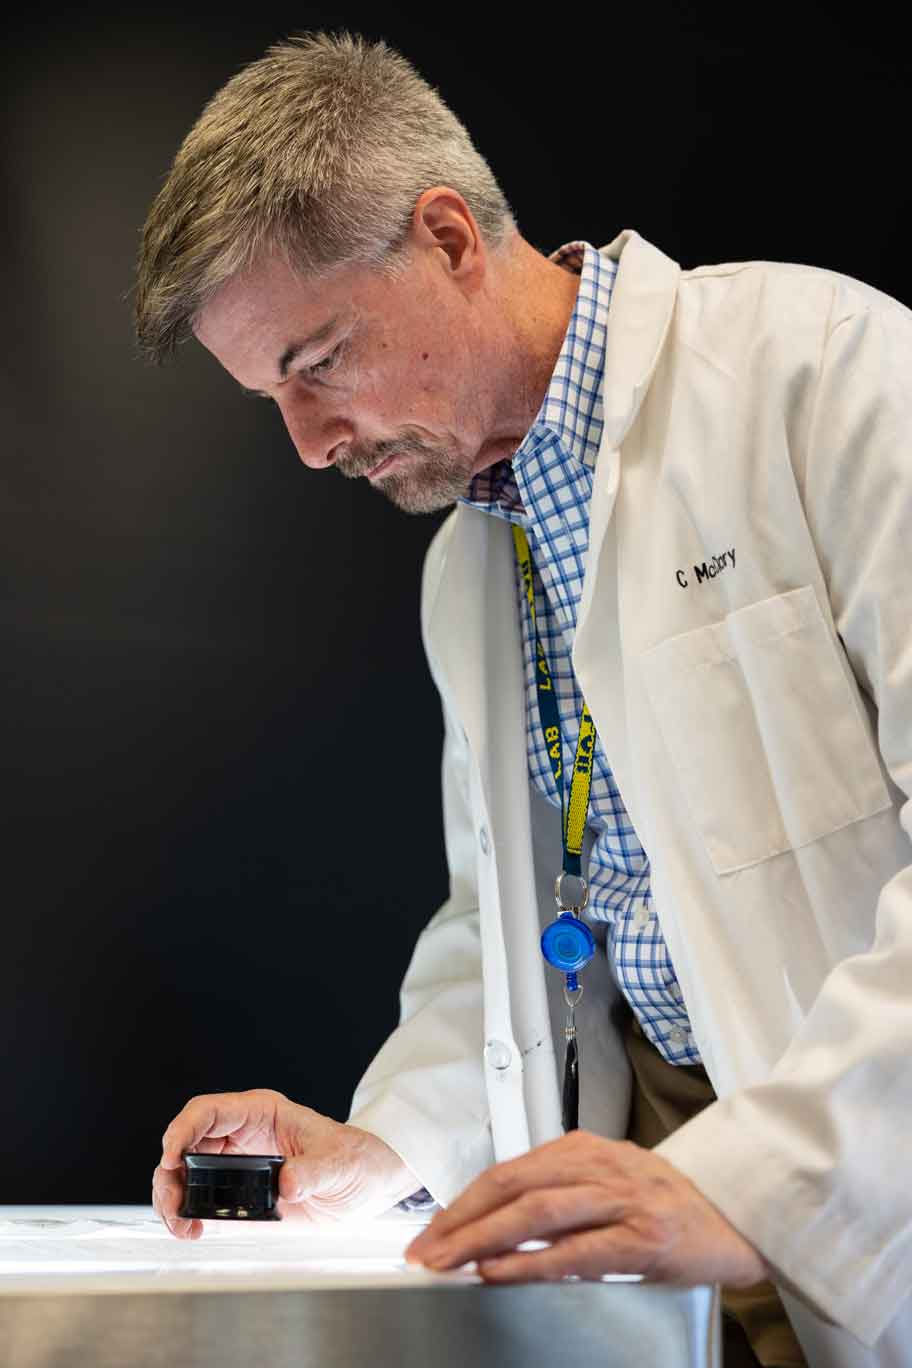 A scientist in a white lab coat studies evidence with a microscope